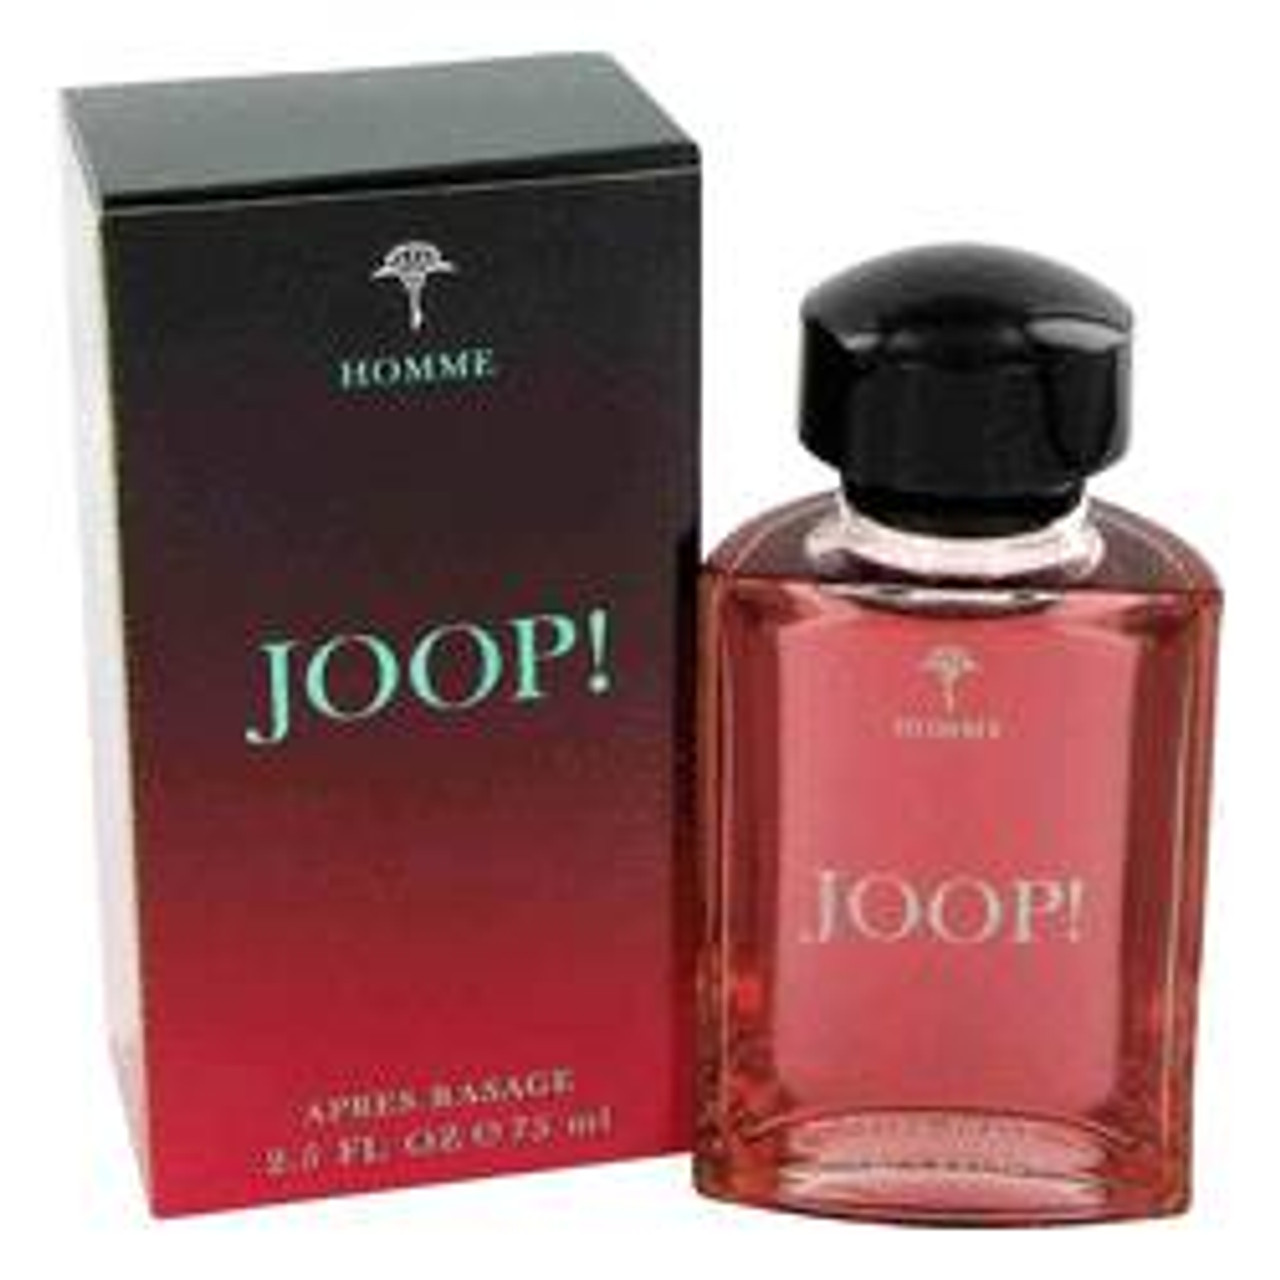 Joop Cologne By Joop! After Shave 2.5 oz for Men - [From 50.33 - Choose pk Qty ] - *Ships from Miami